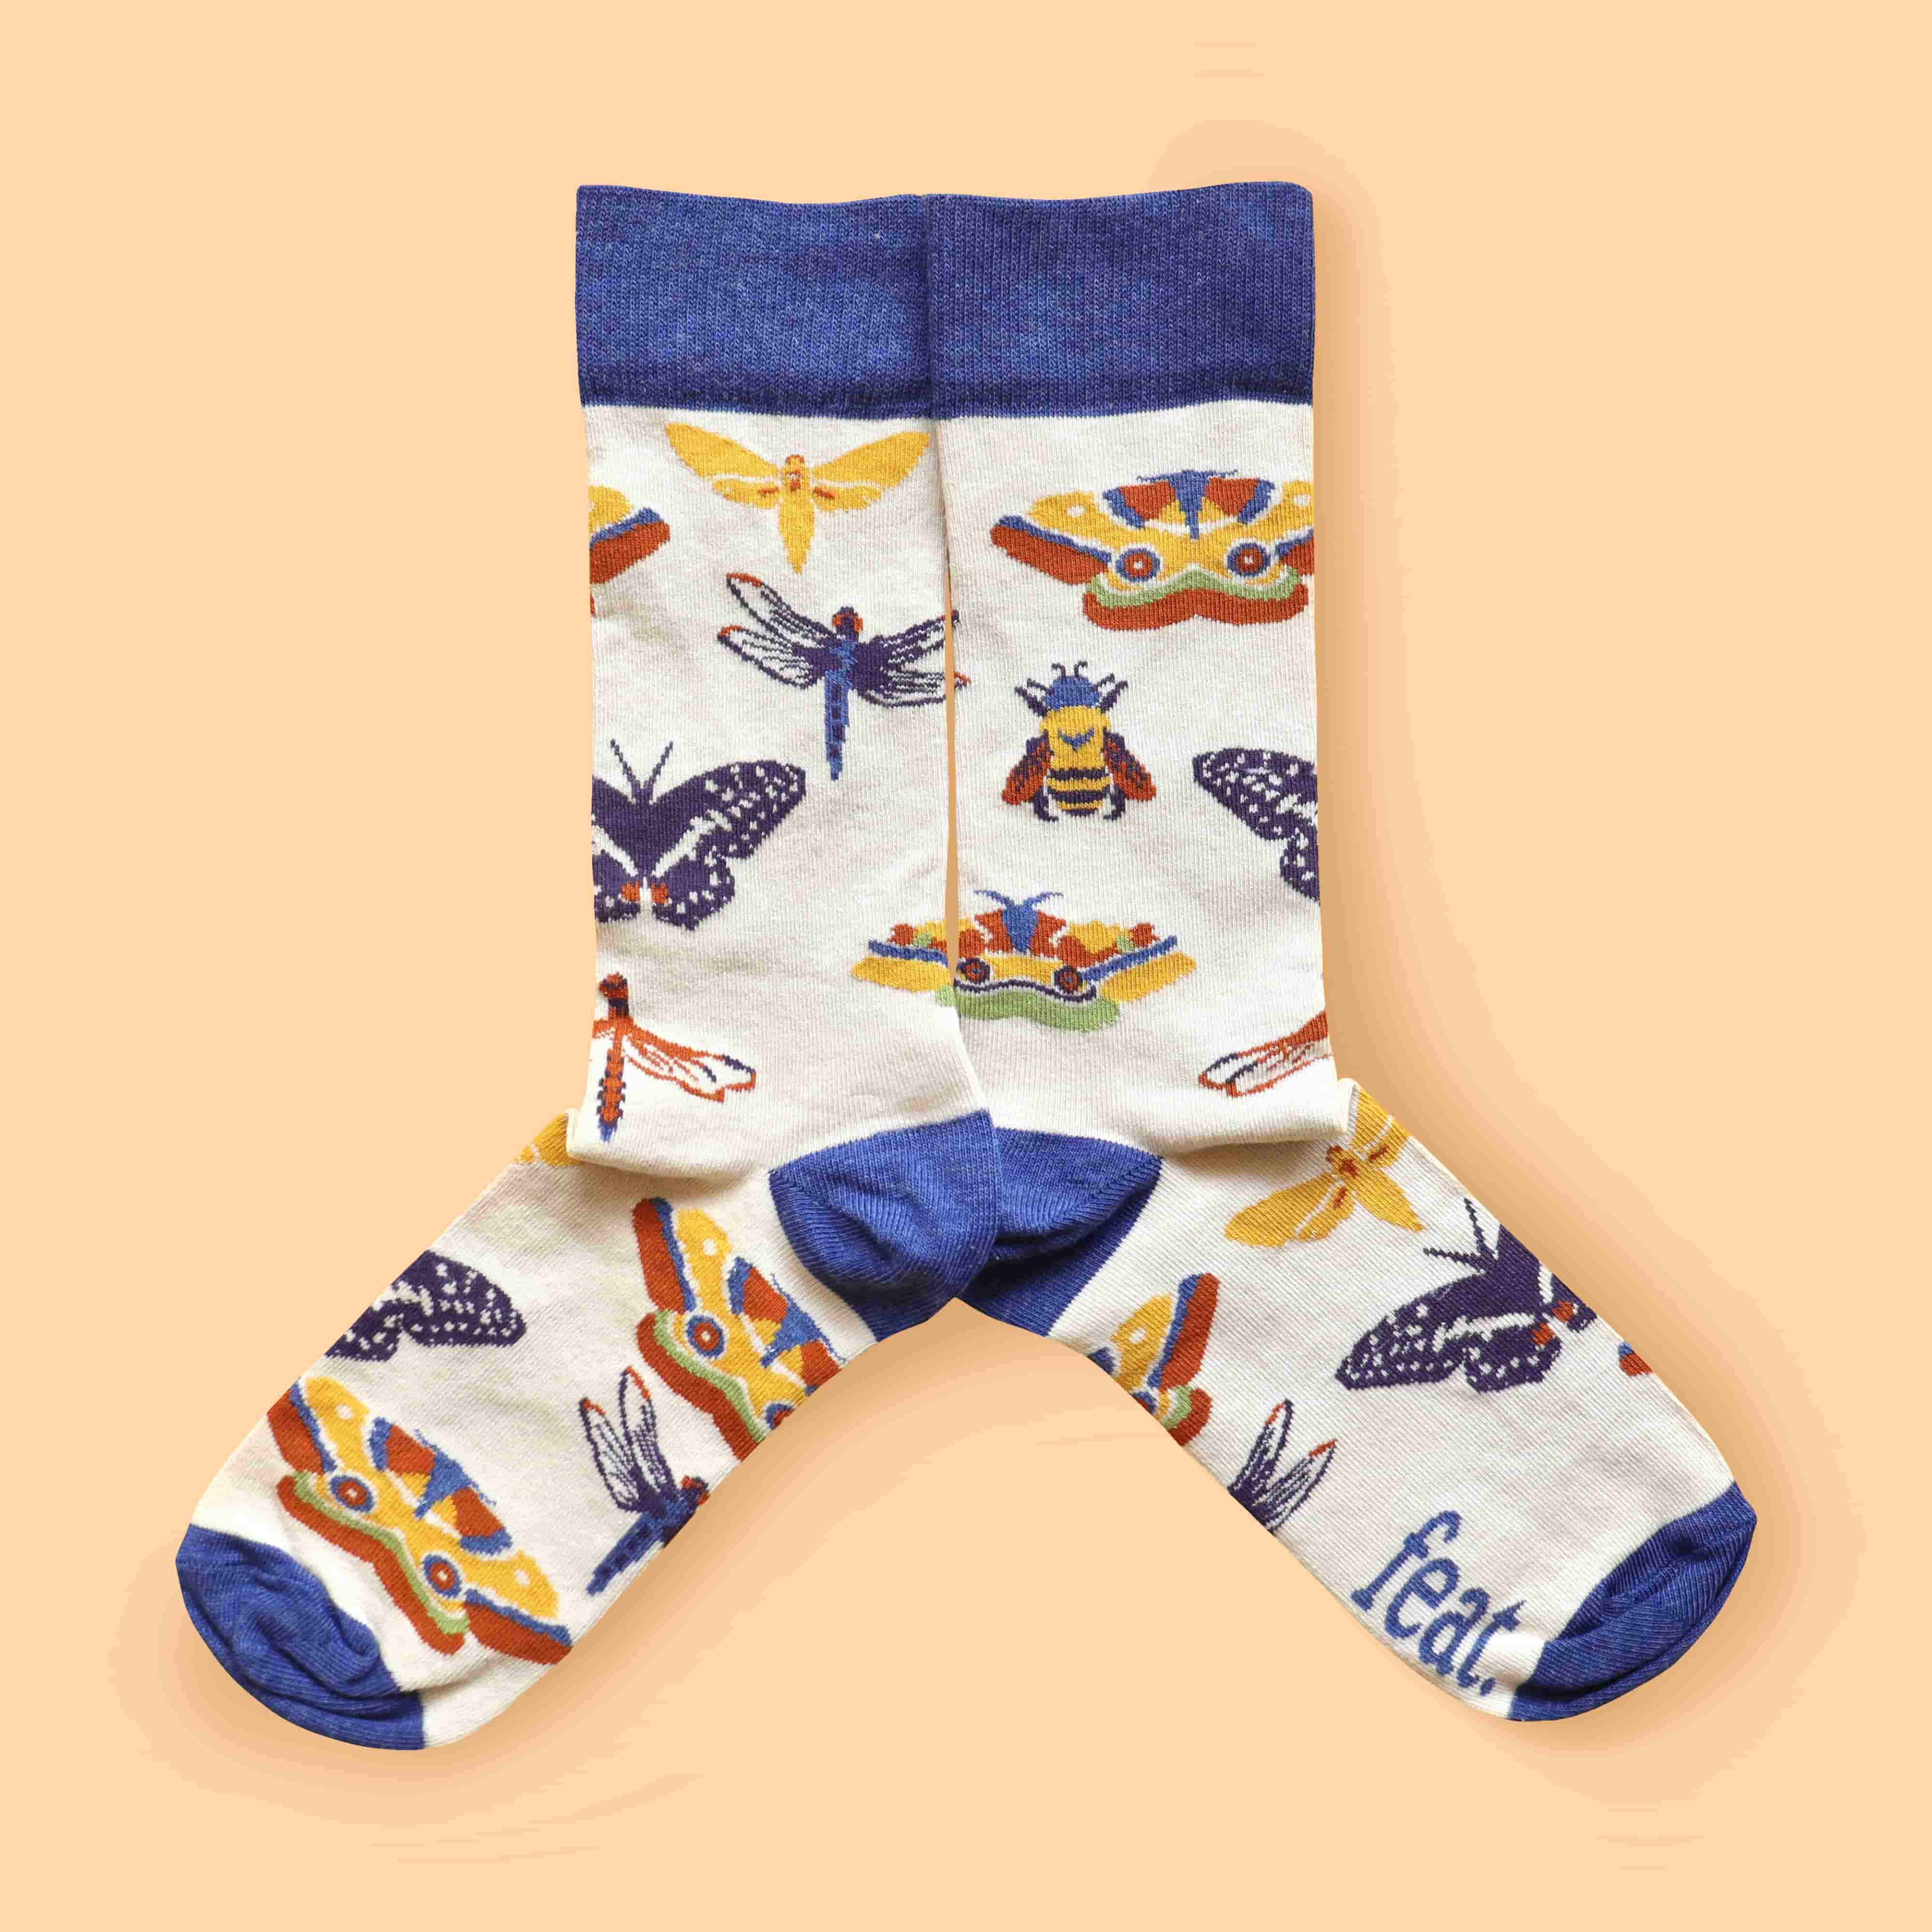 Ladies’ Insects socks